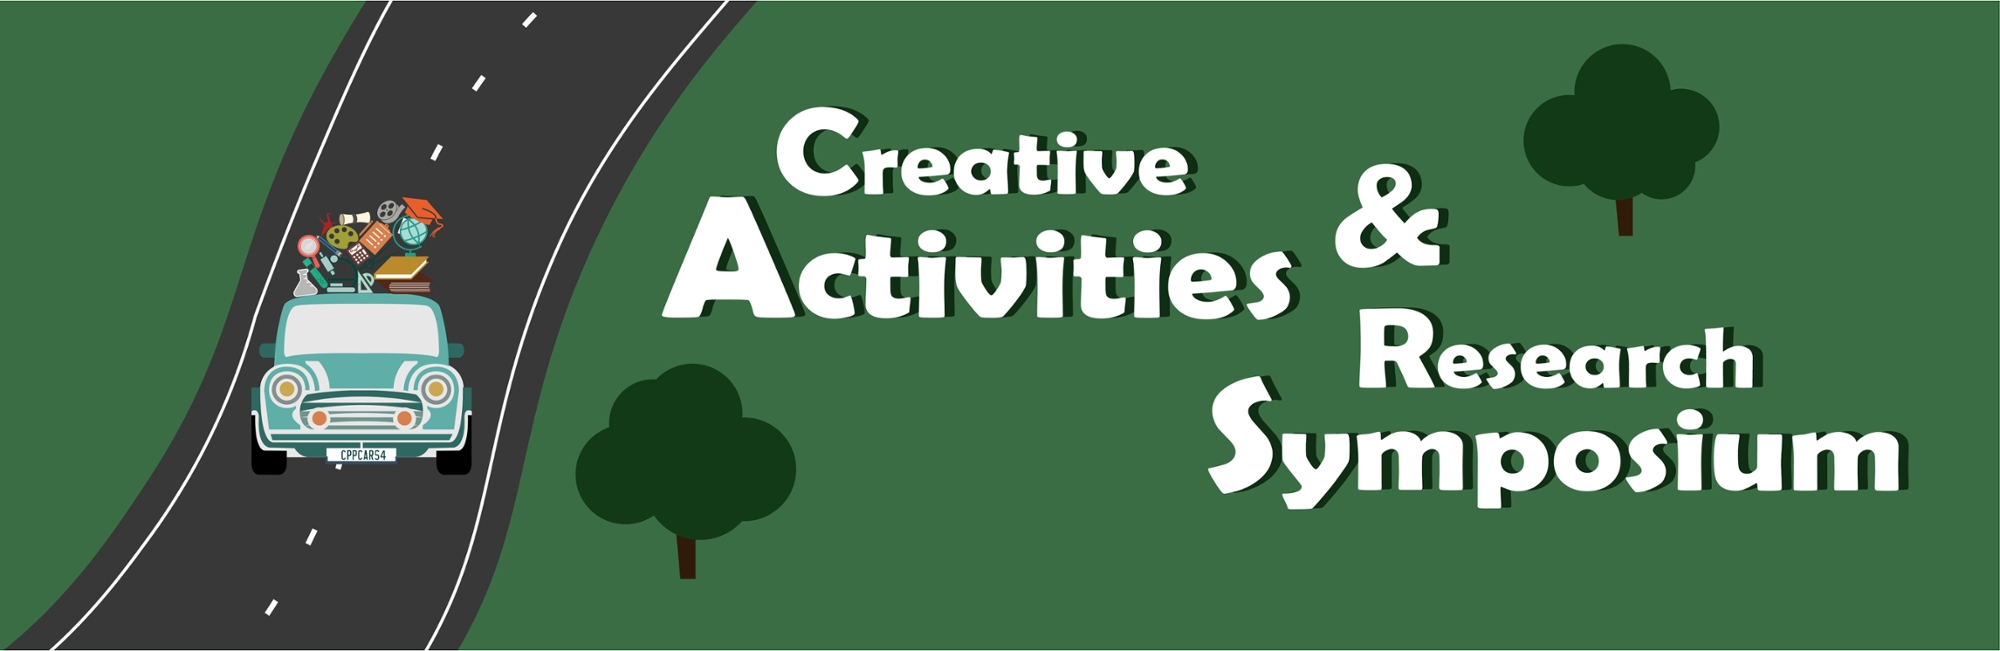 Creative Activities and Research Symposium on animated forest background